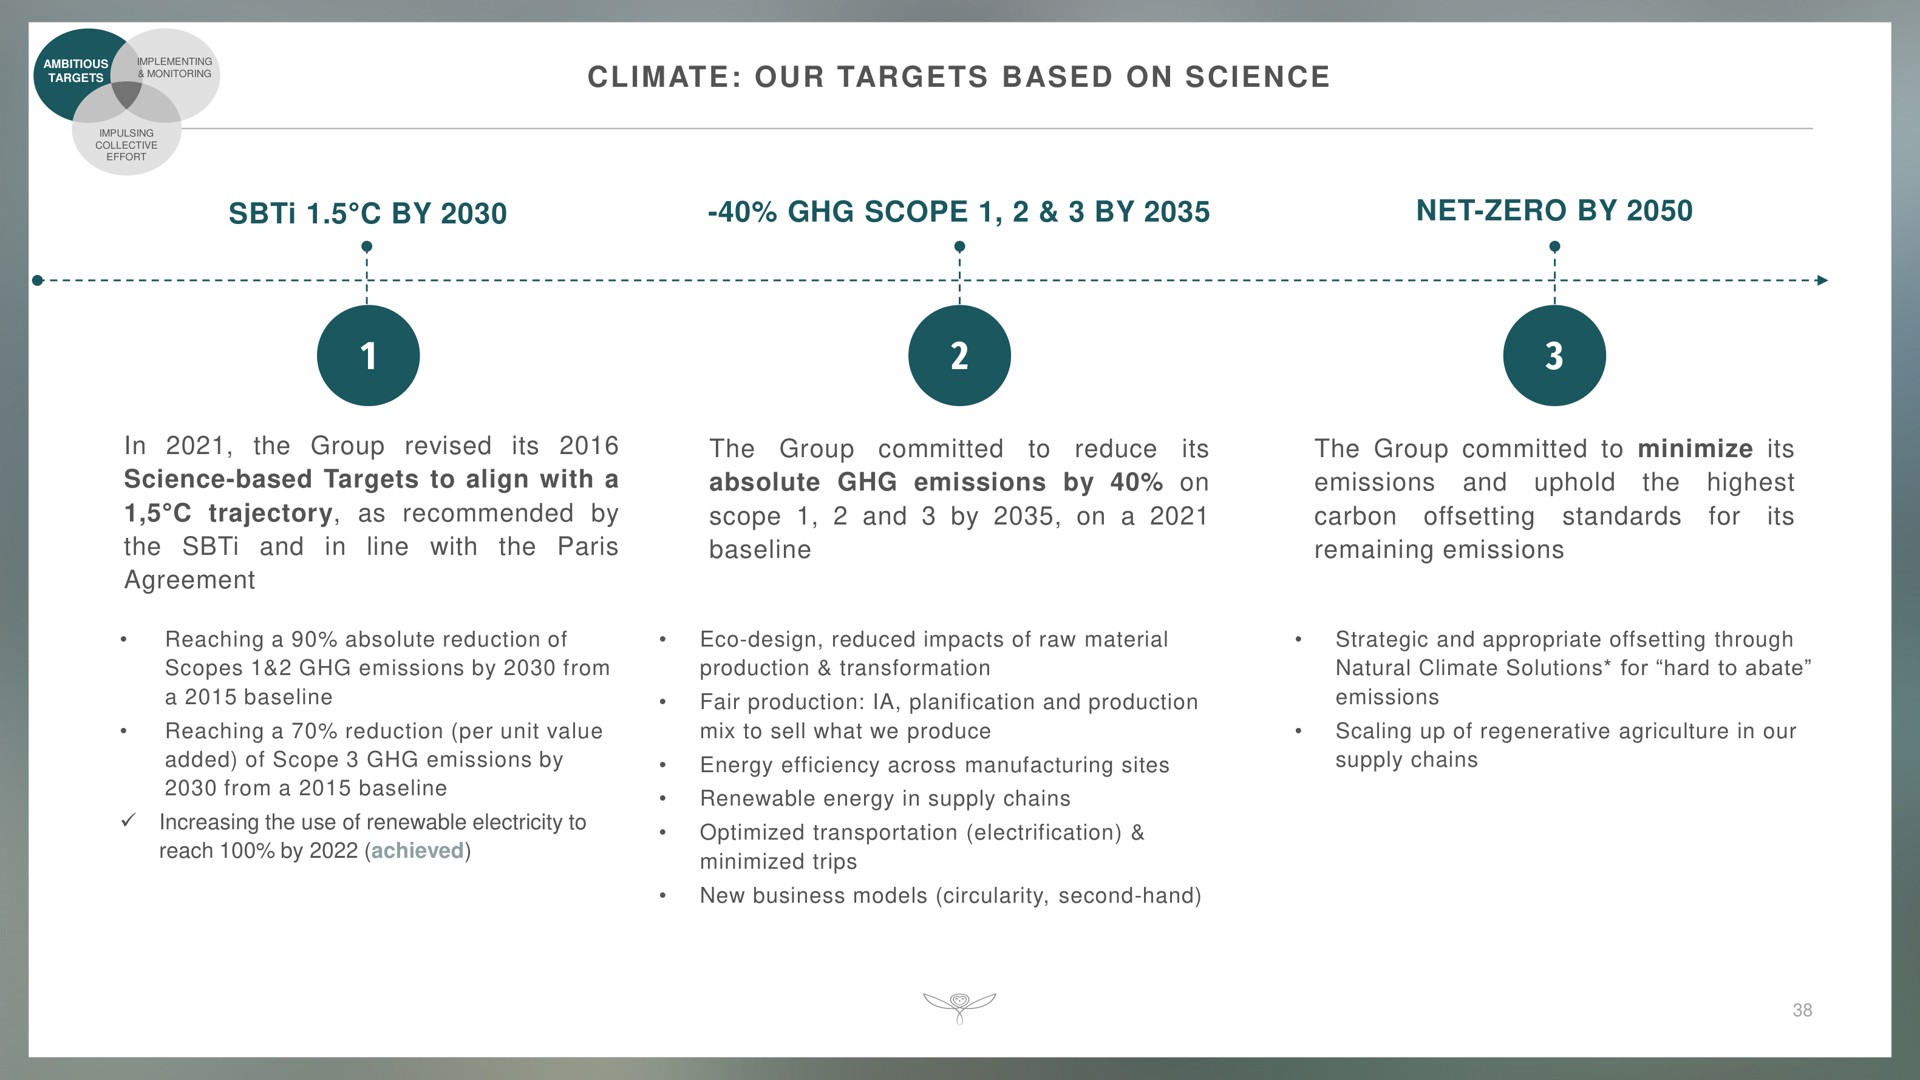 climate our targets based on science by scope by net zero by in the group revised its science based targets to align with a trajectory as recommended by the and in line with the agreement the group committed to reduce its absolute emissions by on scope and by on a the group committed to minimize its emissions and uphold the highest its carbon offsetting standards remaining emissions for | Kering